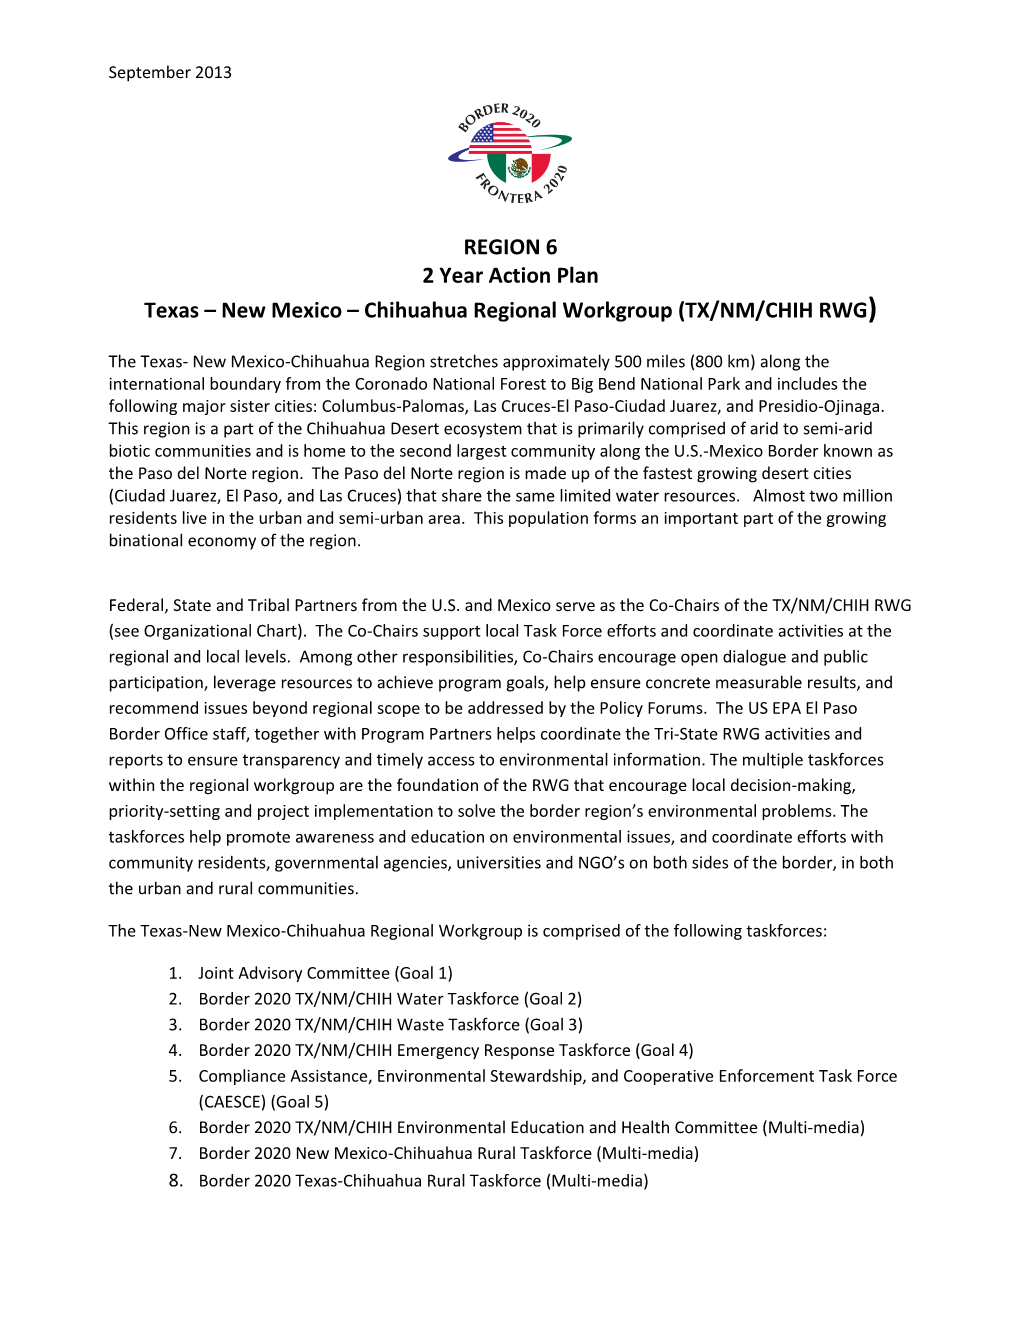 New Mexico – Chihuahua Regional Workgroup (TX/NM/CHIH RWG)